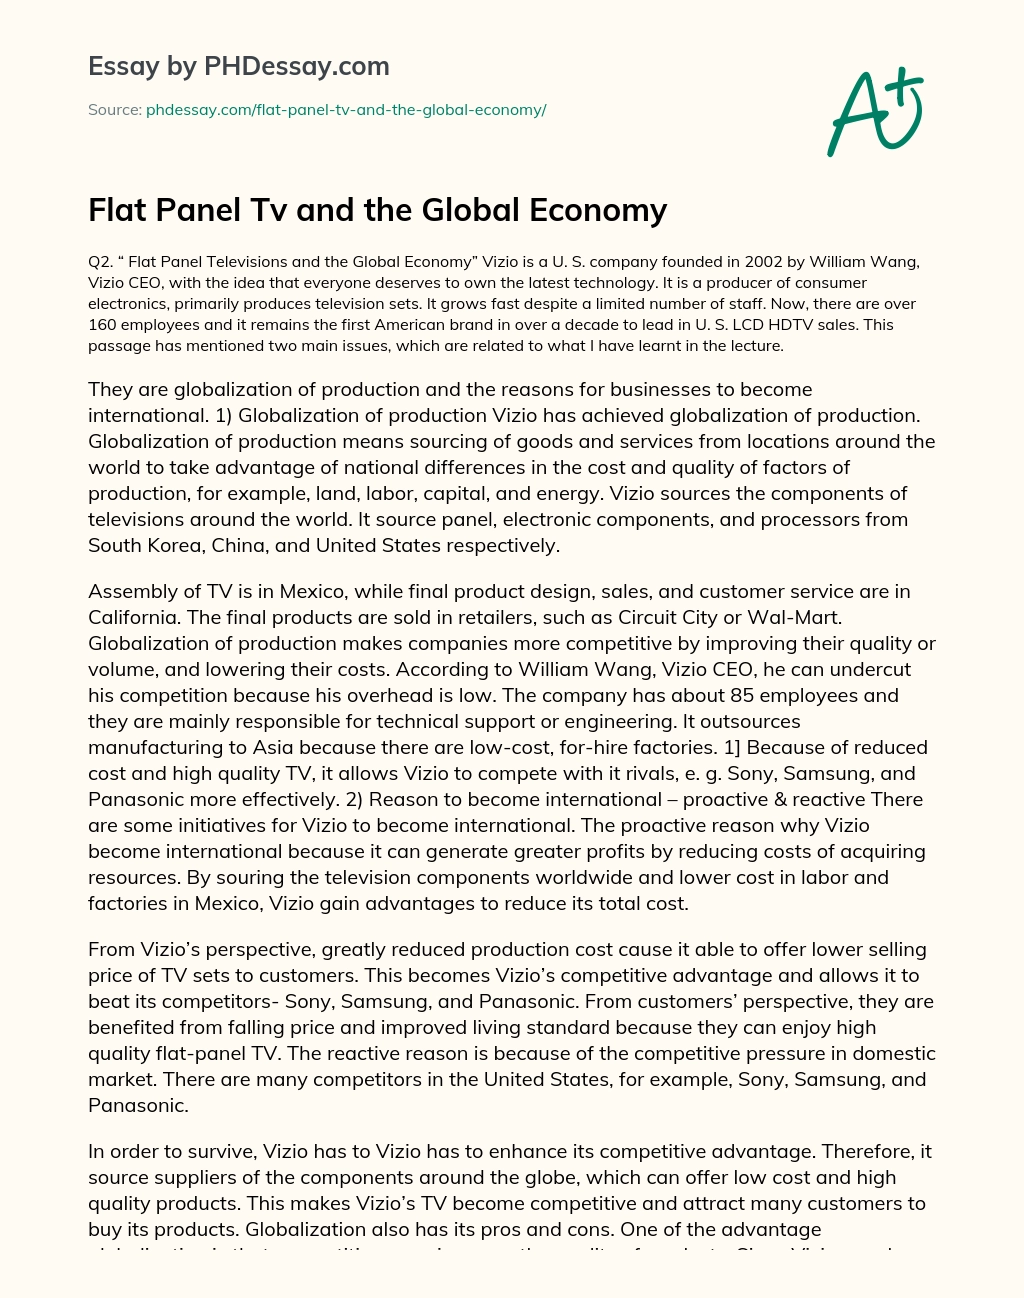 Flat Panel Tv and the Global Economy essay